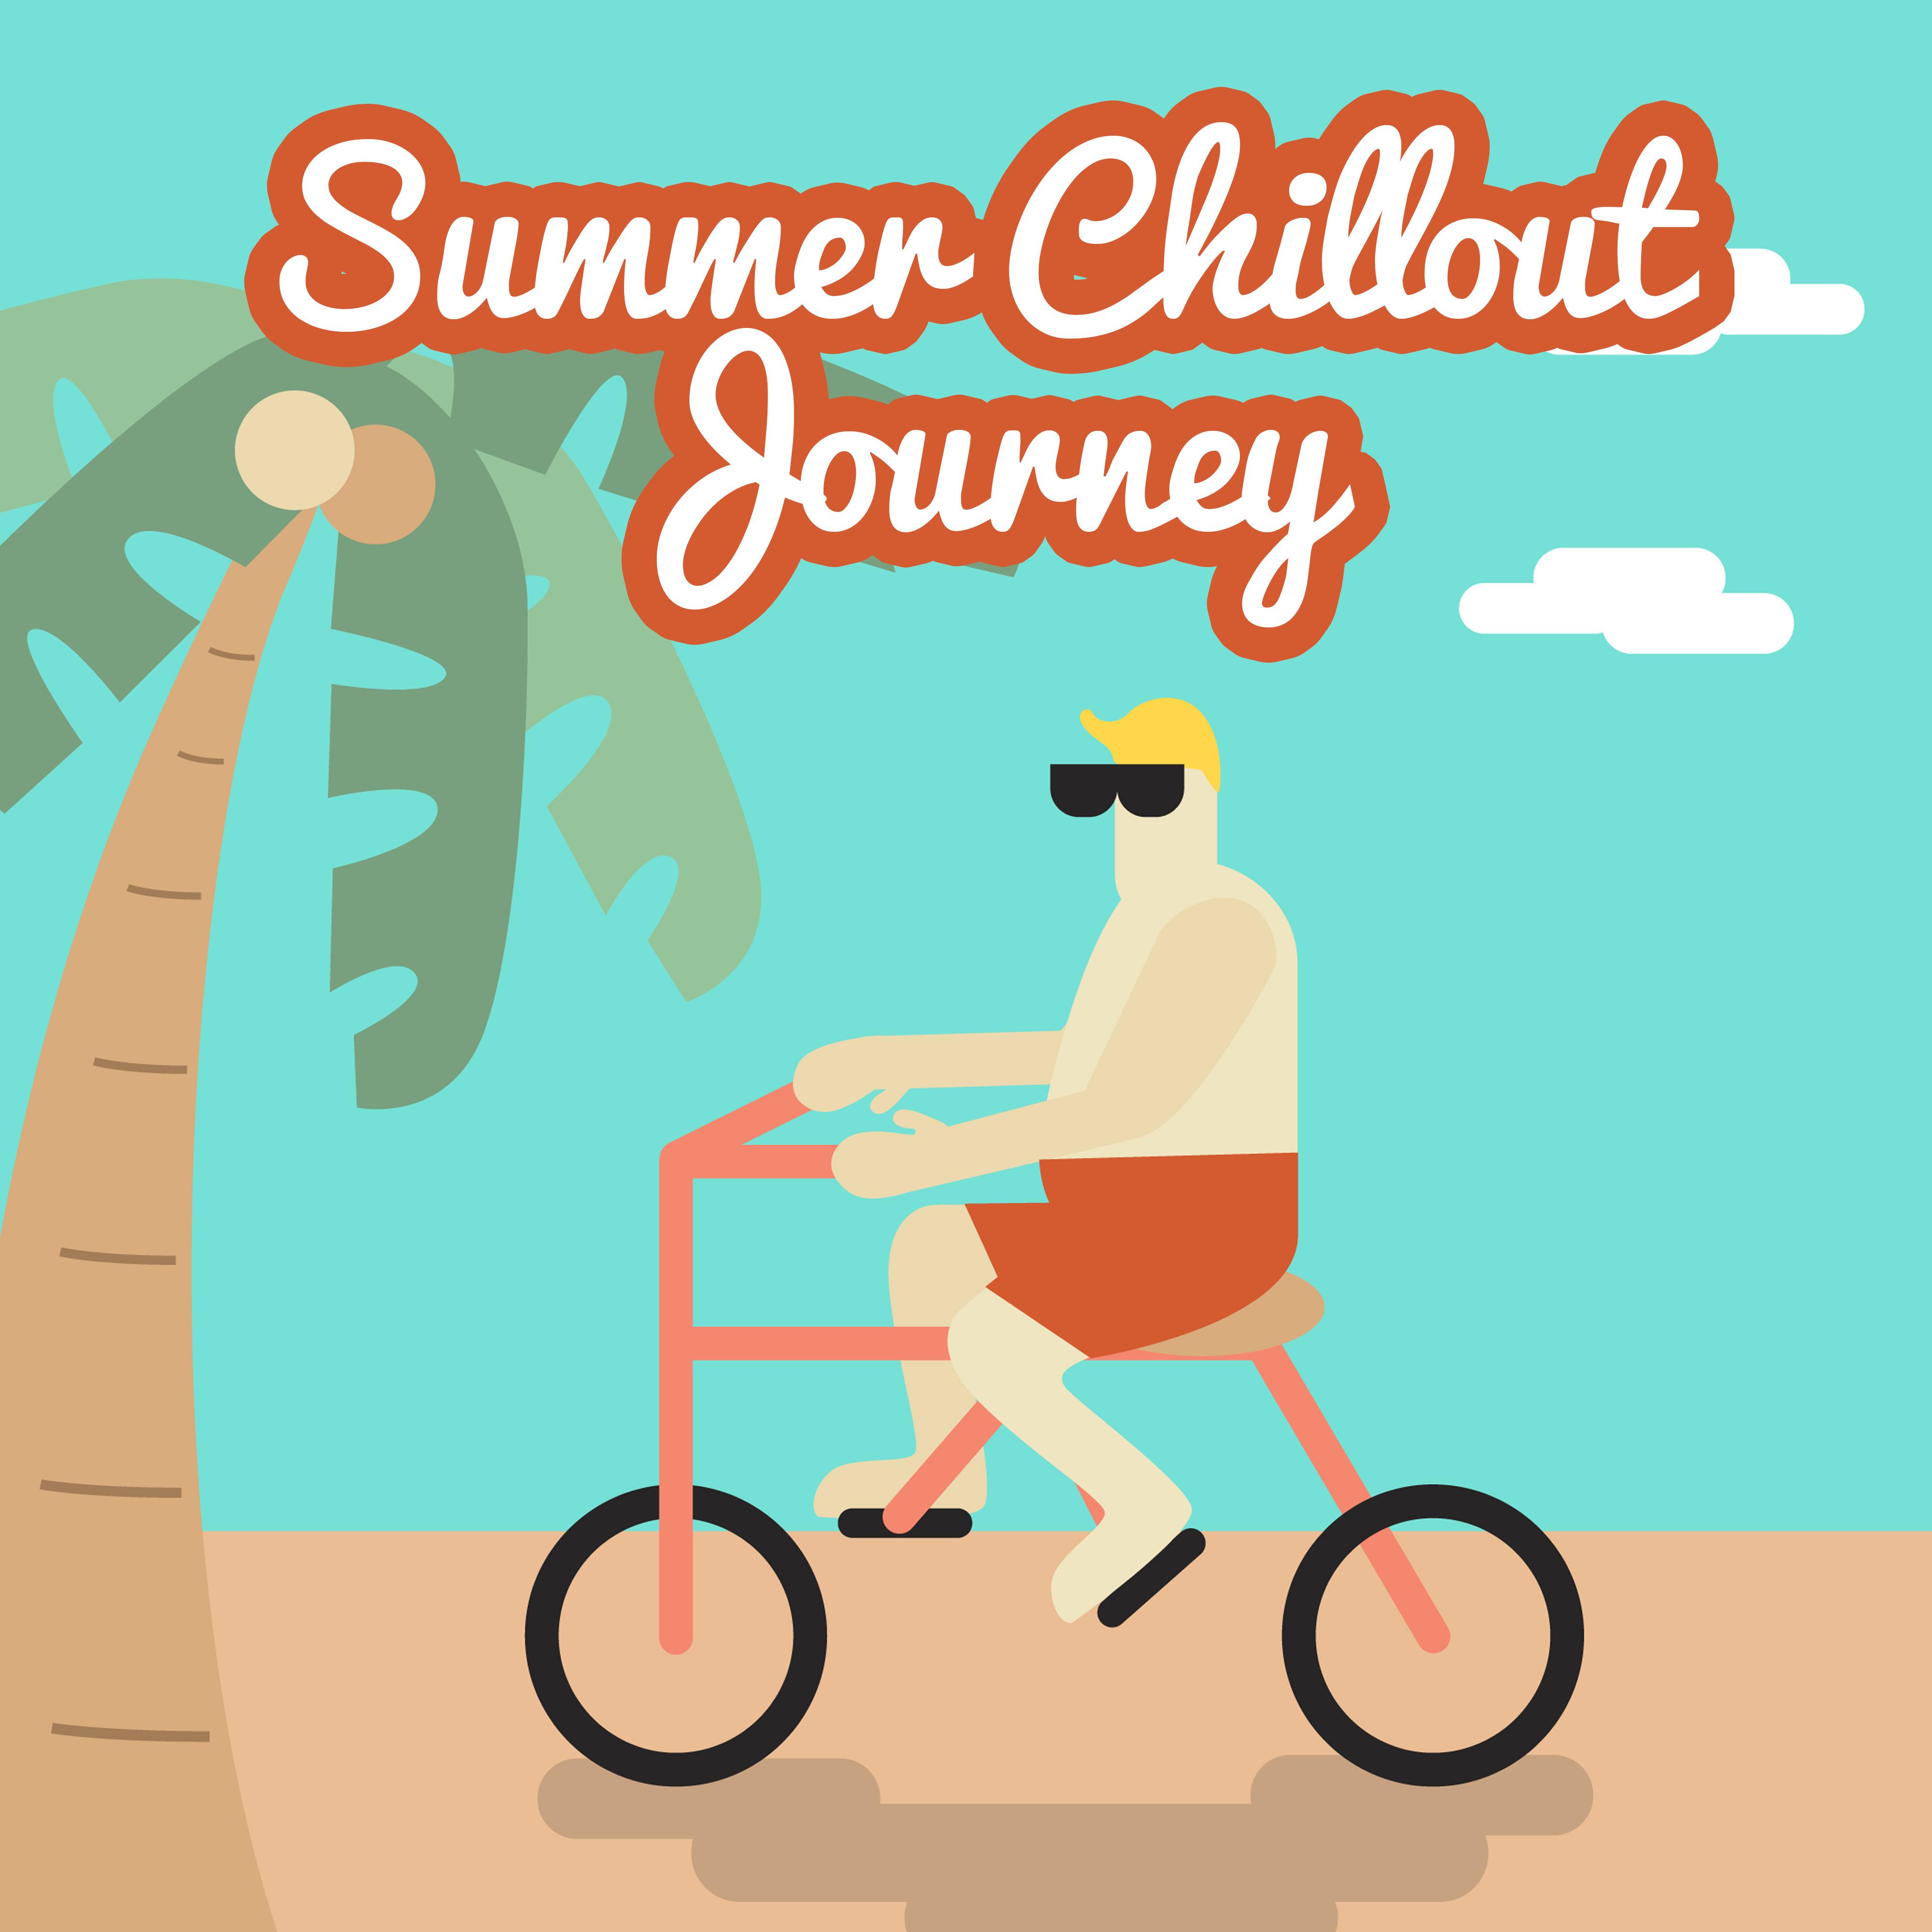 Summer Chillout Journey – Holiday Relaxation at The Beach, Stress Free, Fresh Chill Beats 2019